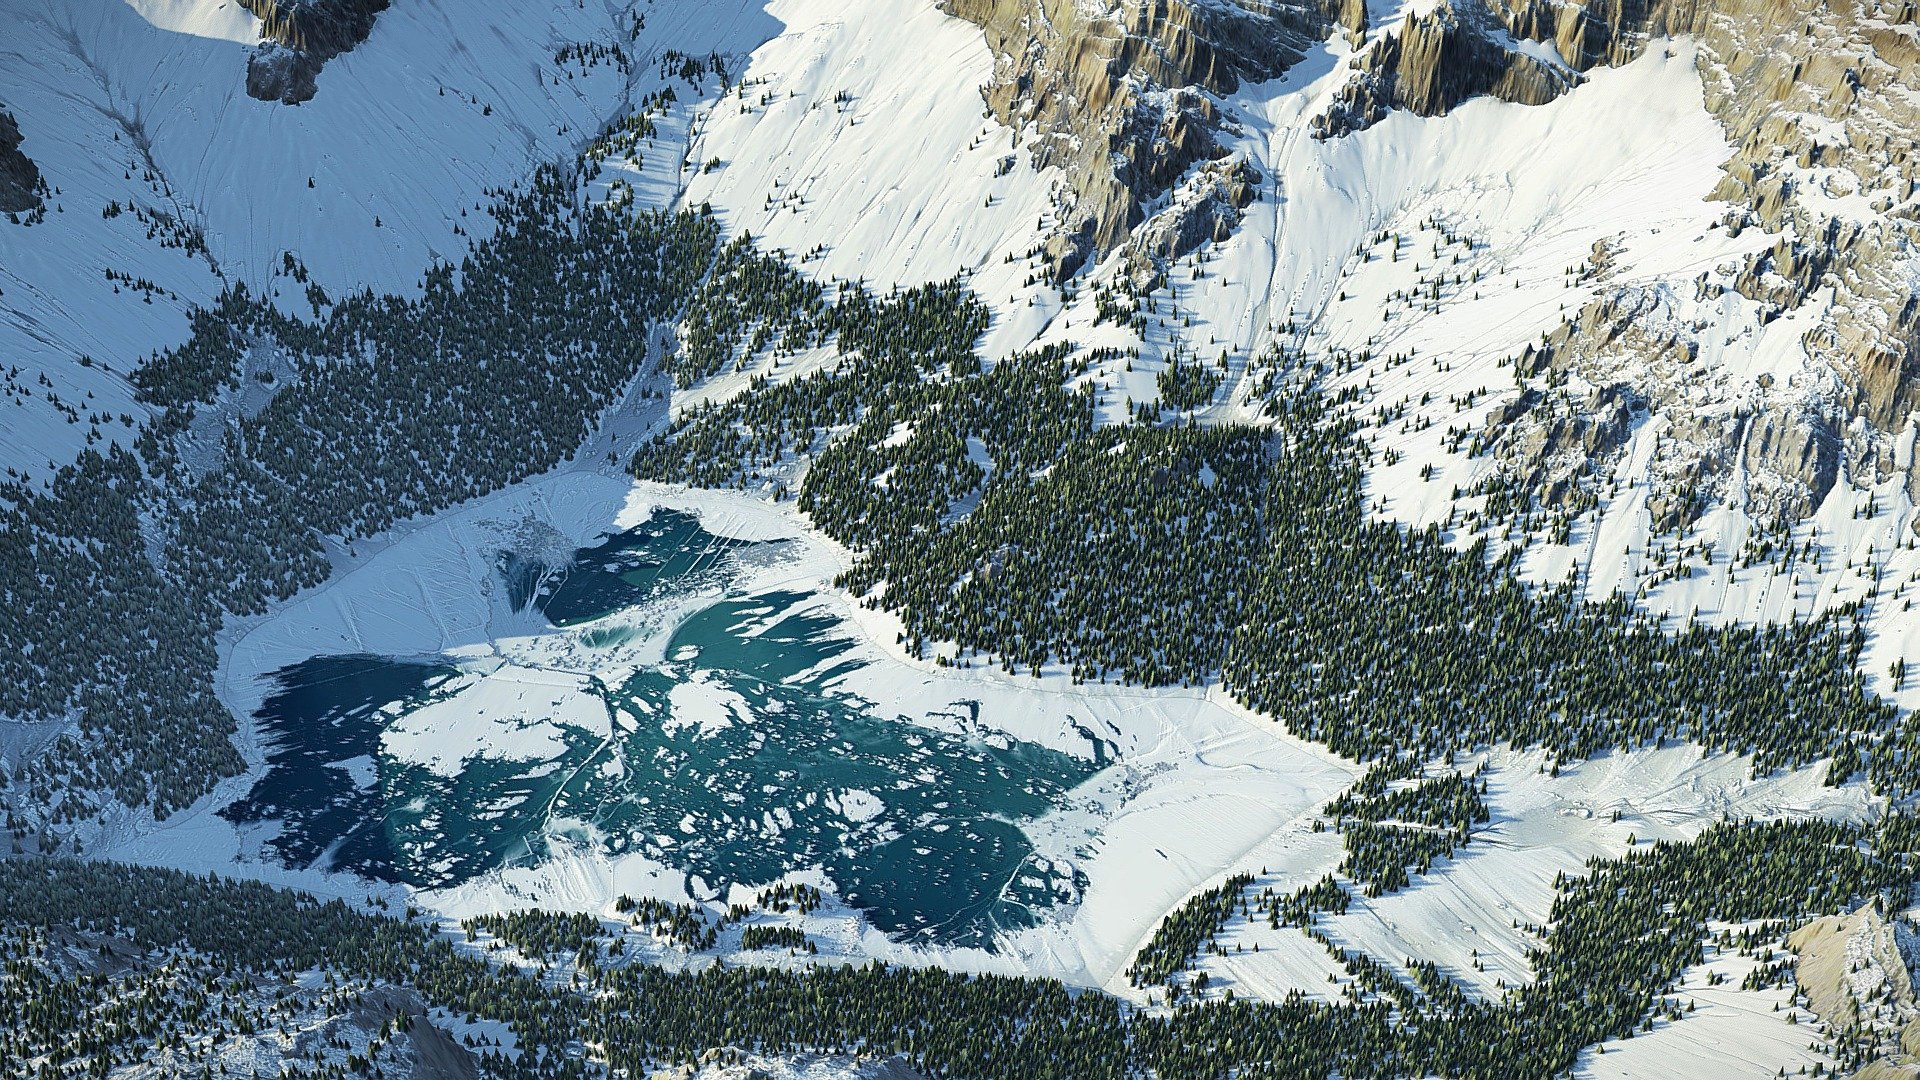 Fully Procedural Landscape created in World Machine. Inspired by winter.

included 4k textures - COLOR  NORMAL  LIGHT

You can buy it here - https://sketchfab.com/3d-models/mountain-lake-world-machine-ba07b725c51b49879c8f8a02660990ce

Other assets on https://gamewarming.com/ - Mountain Lake Landscape - (World Machine) - 3D model by gamewarming 3d model